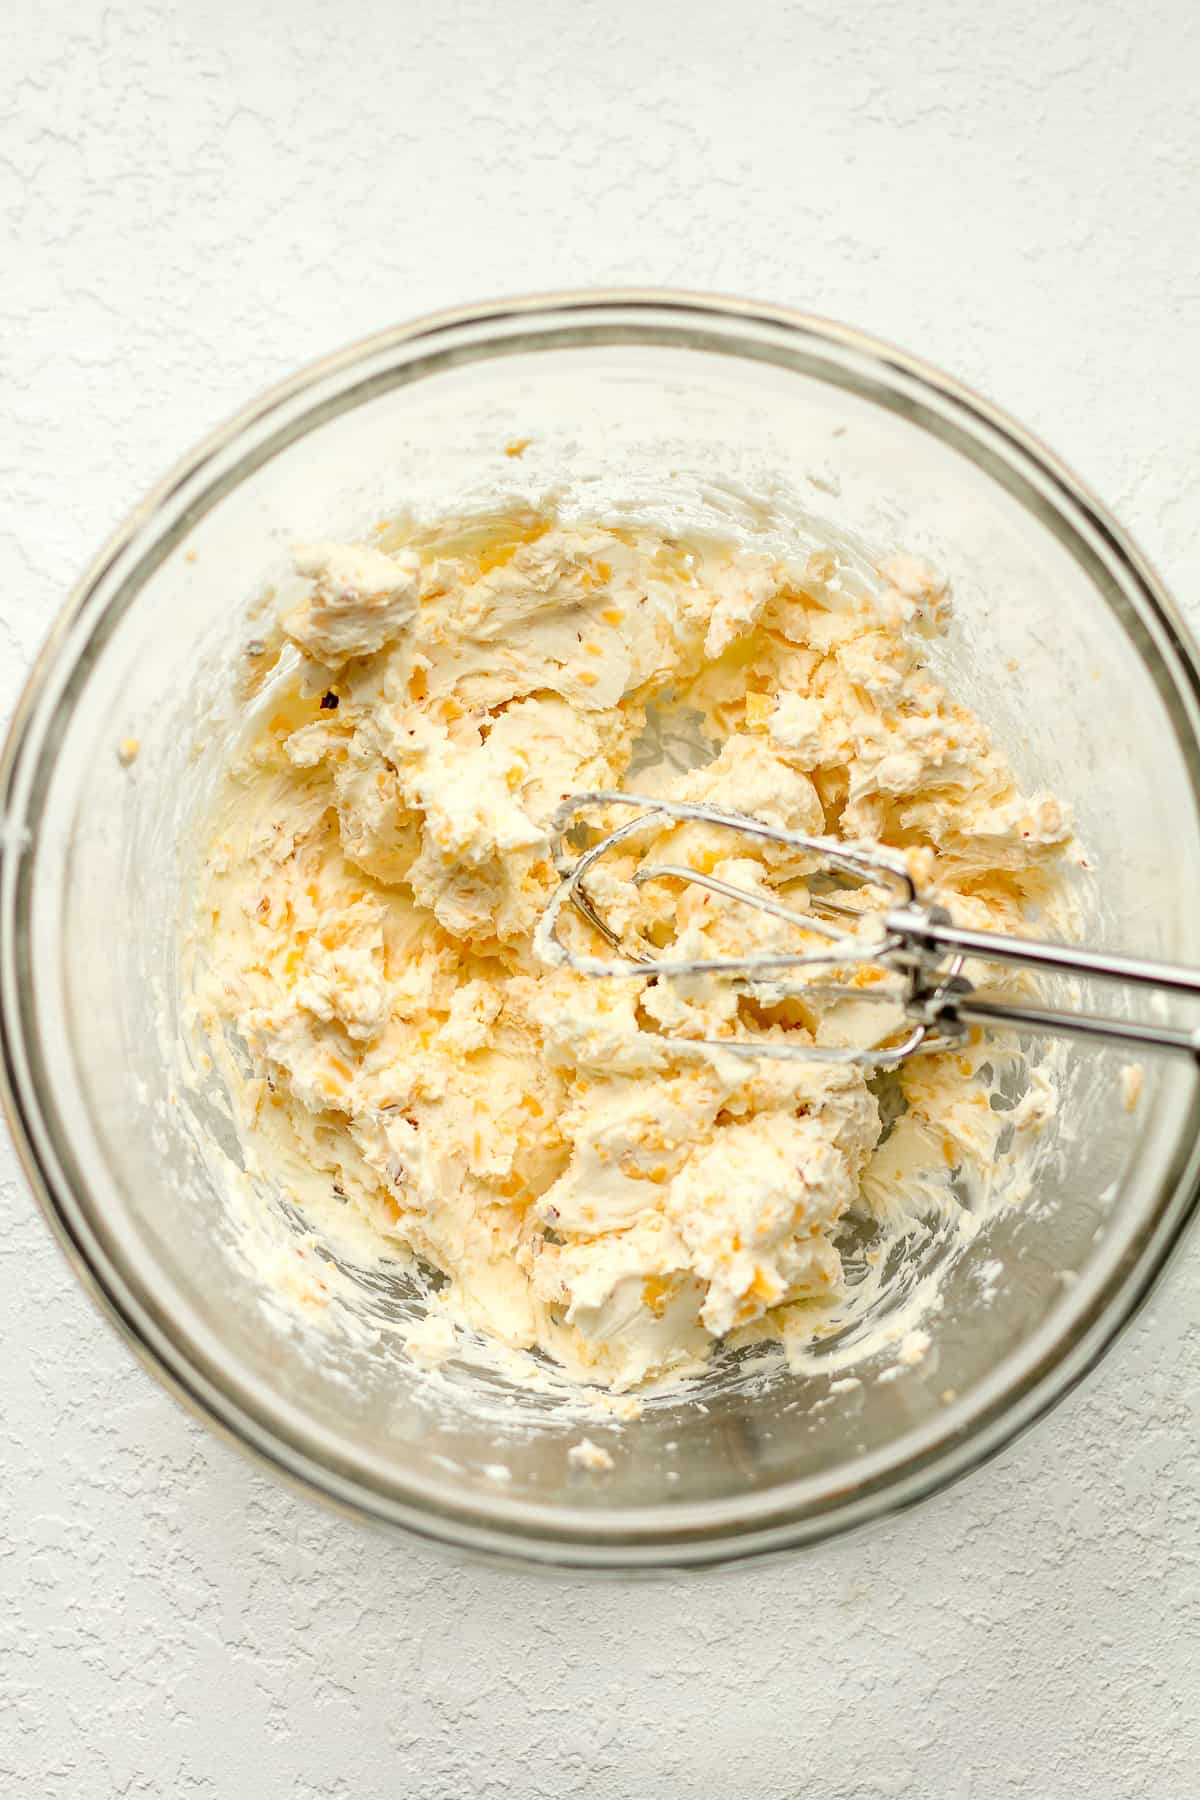 A bowl of the cream cheese filling for the poppers.